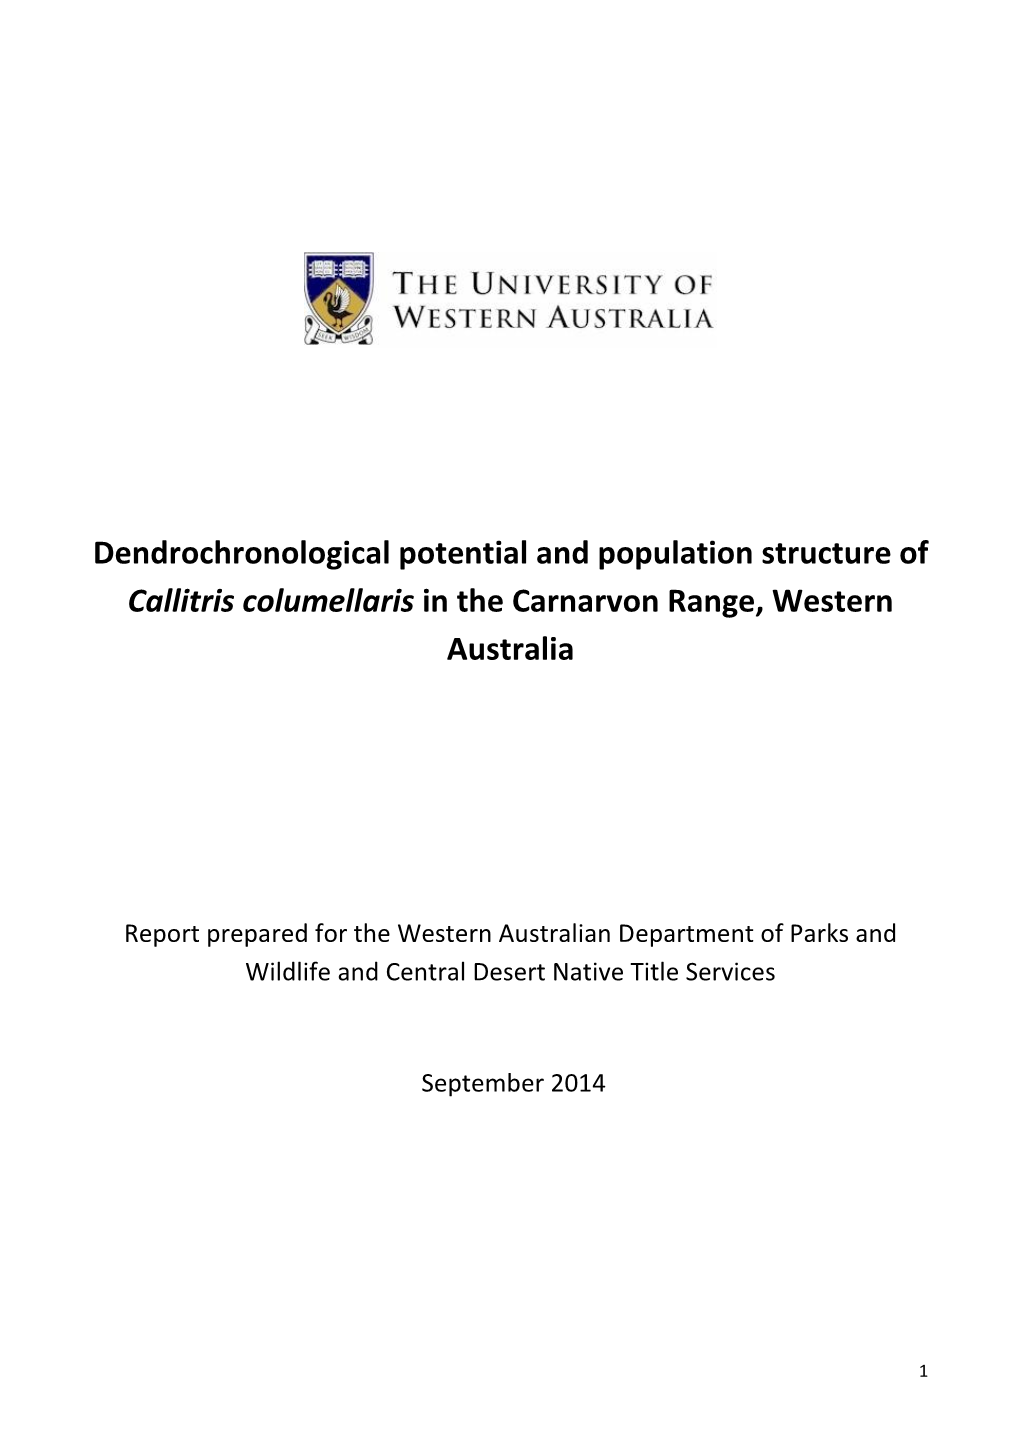 Dendrochronological Potential and Population Structure of Callitris Columellaris in the Carnarvon Range, Western Australia